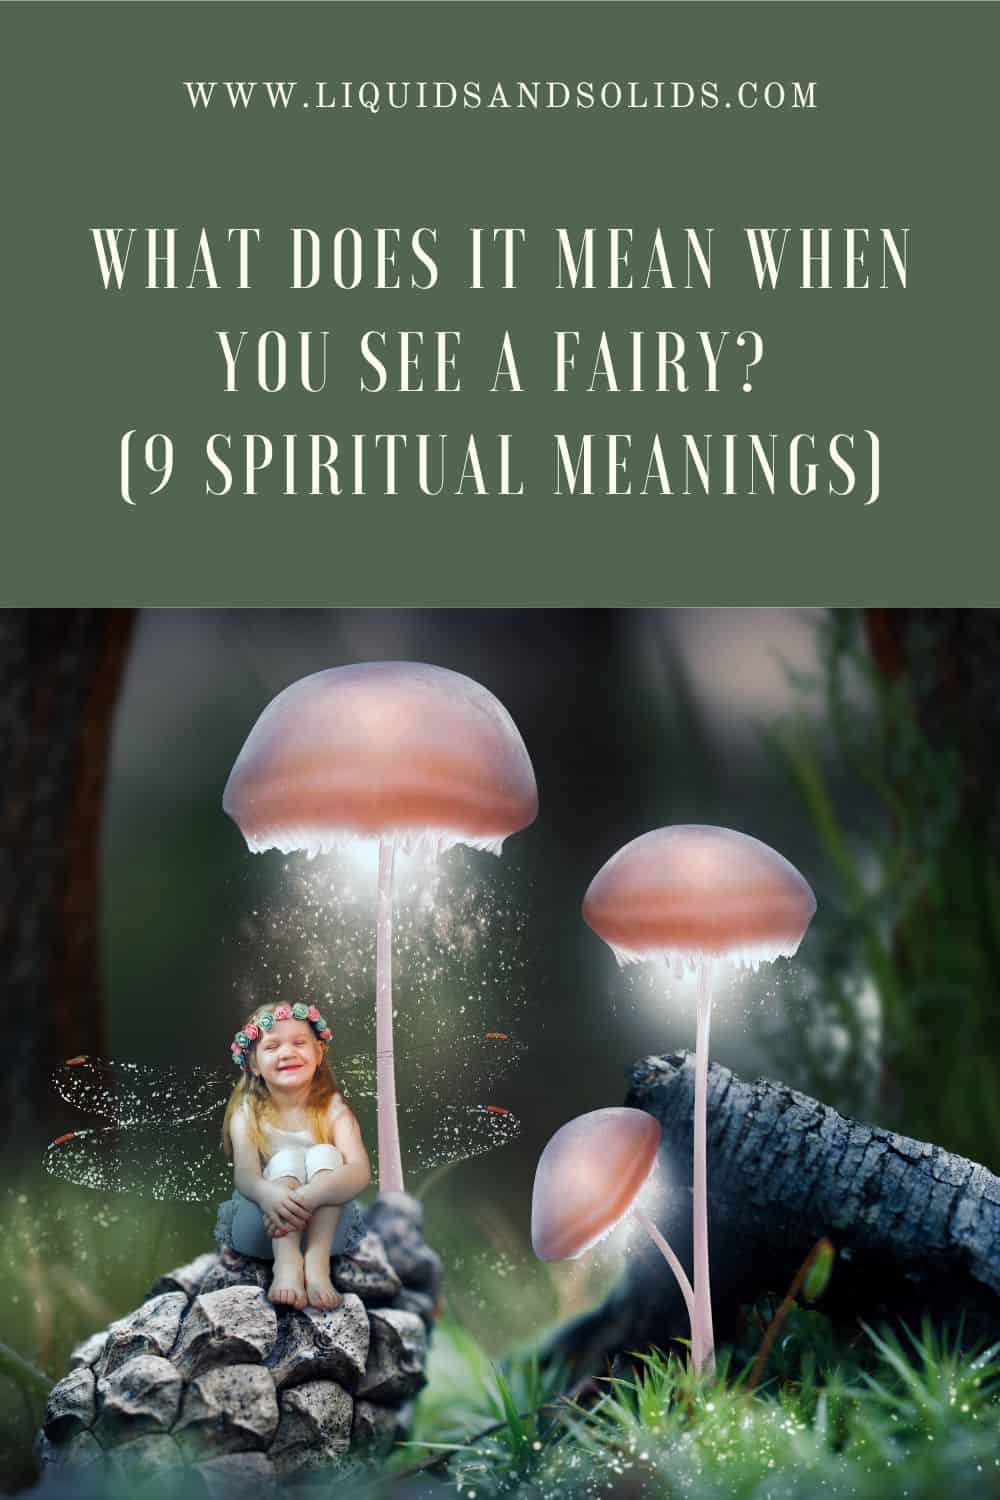 9 Meanings of Seeing a Fairy